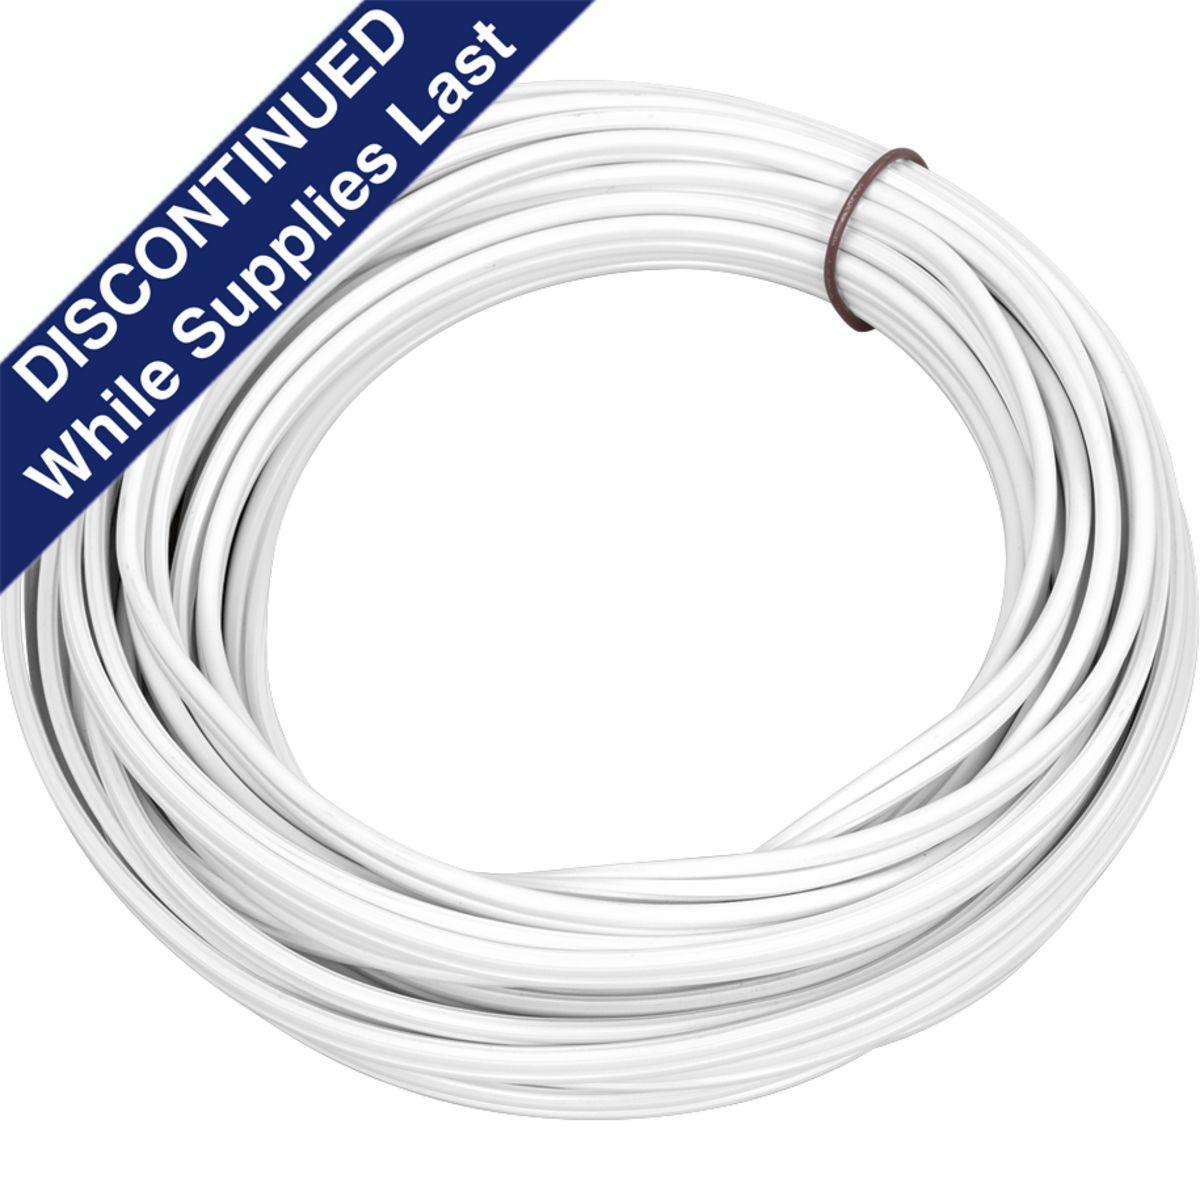 Hubbell P860029-028 20 Feet of SPT-2 wire can be used for direct wiring of the Hide-a-Lite V LED Puck P700005 series. The wiring provides the length needed to daisy chain the LED pucks together. This wire is rated so it can be exposed under the cabinet and is safe to touch. 